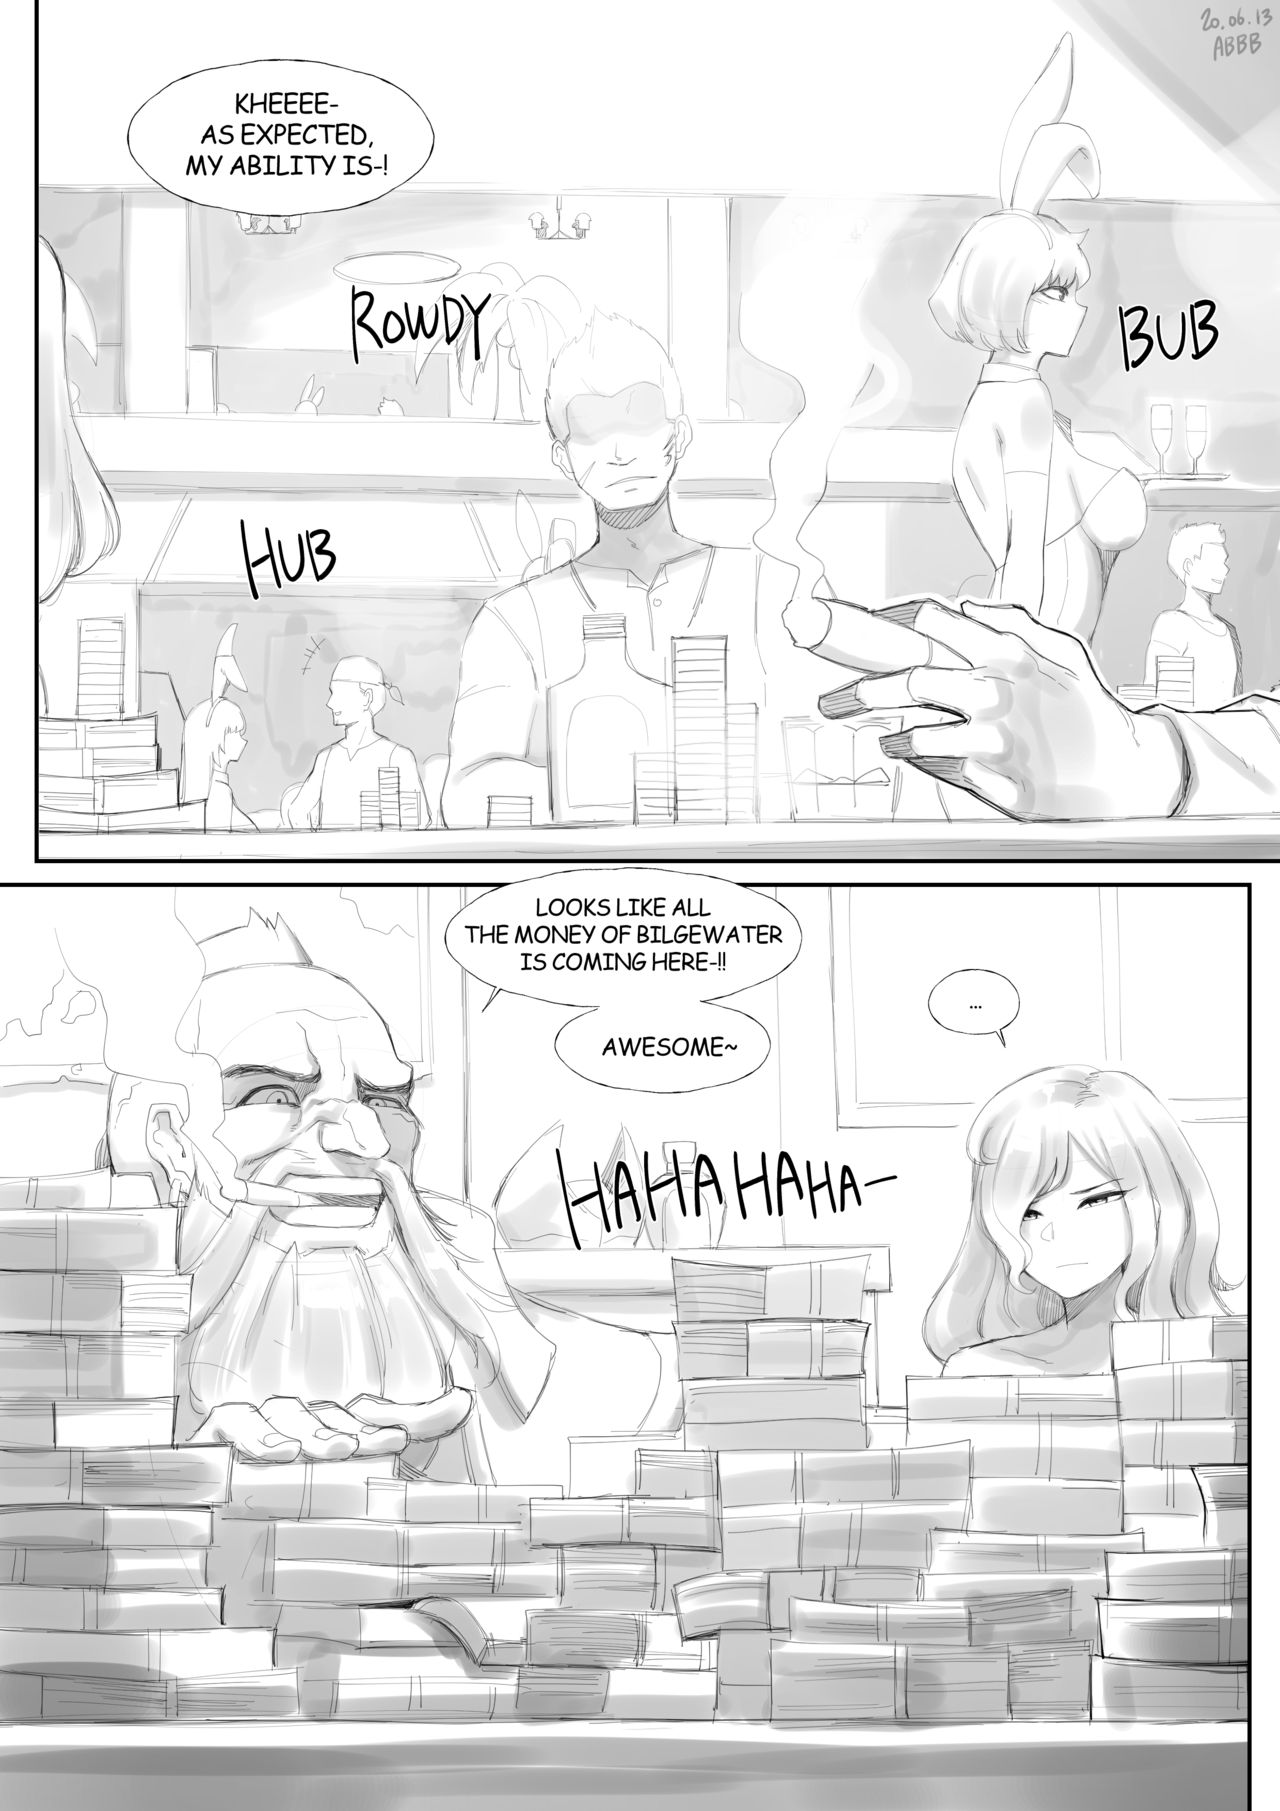 [ABBB] Miss Fortune (League of Legends) [English] (ongoing) page 6 full